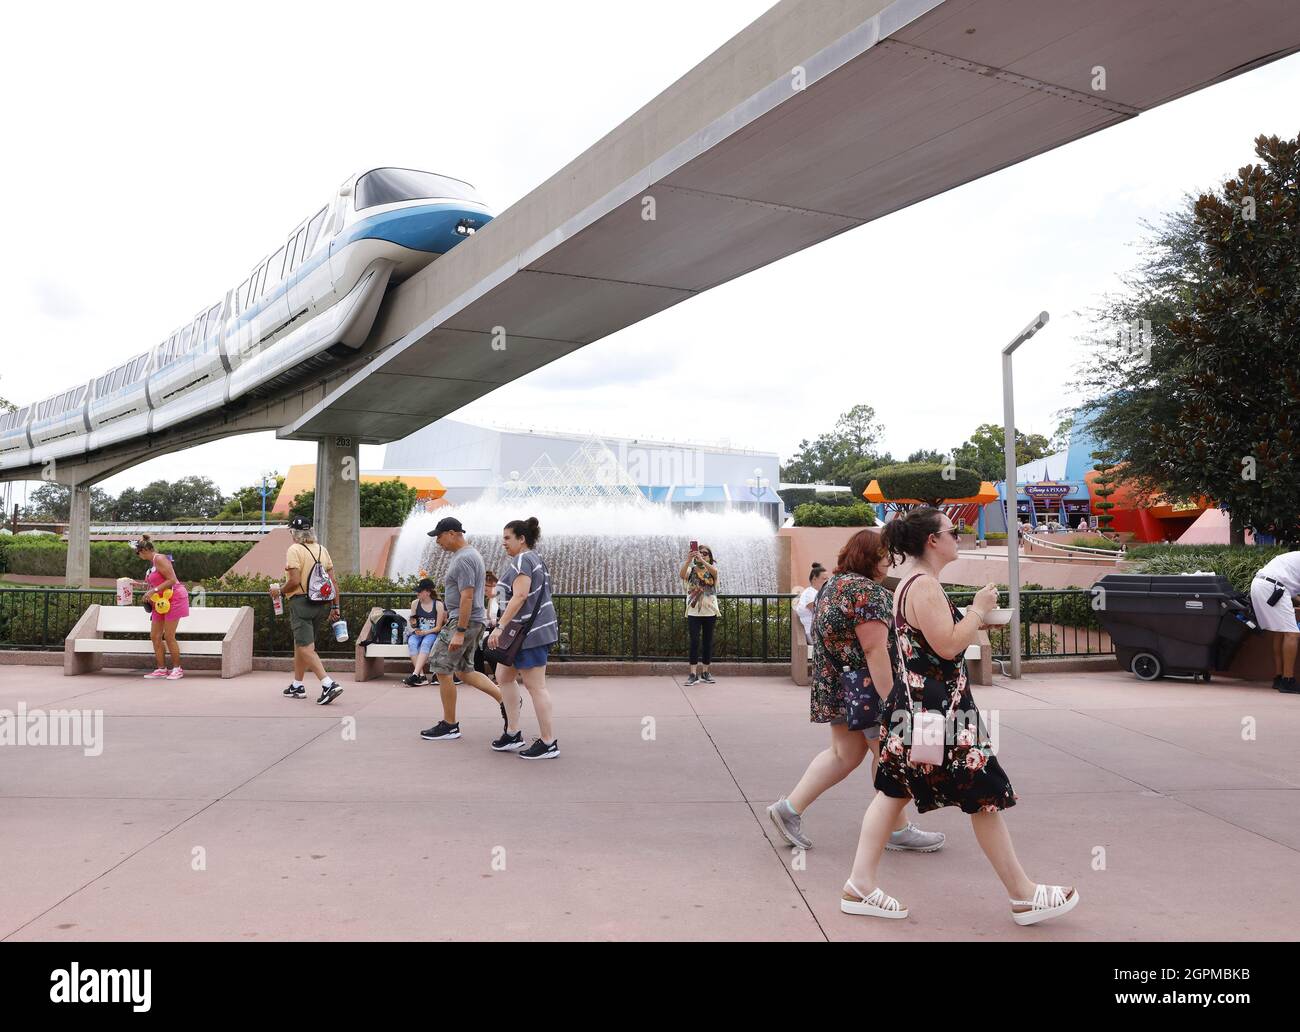 Orlando, United States. 29th Sep, 2021. The Walt Disney World Monorail System passes through Epcot theme park during 'The World's Most Magical Celebration' - the 50th anniversary of Walt Disney World Resort! on Wednesday, September 29, 2021 in Orlando, Florida. Photo by John Angelillo/UPI Credit: UPI/Alamy Live News Stock Photo